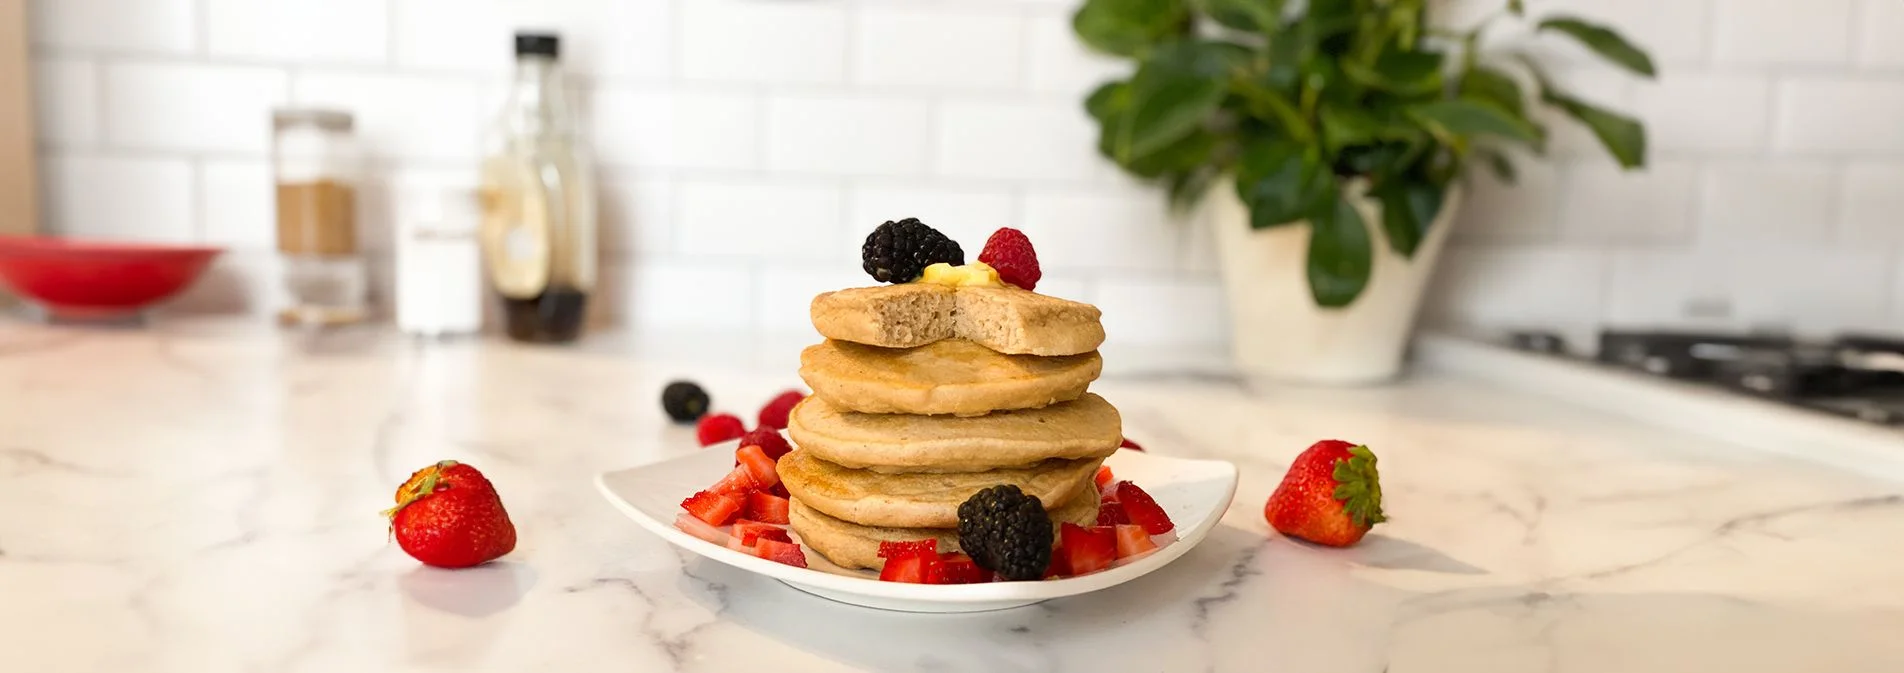 A front shot of a stack of pancakes on a plate topped with berries and a pat of butter.